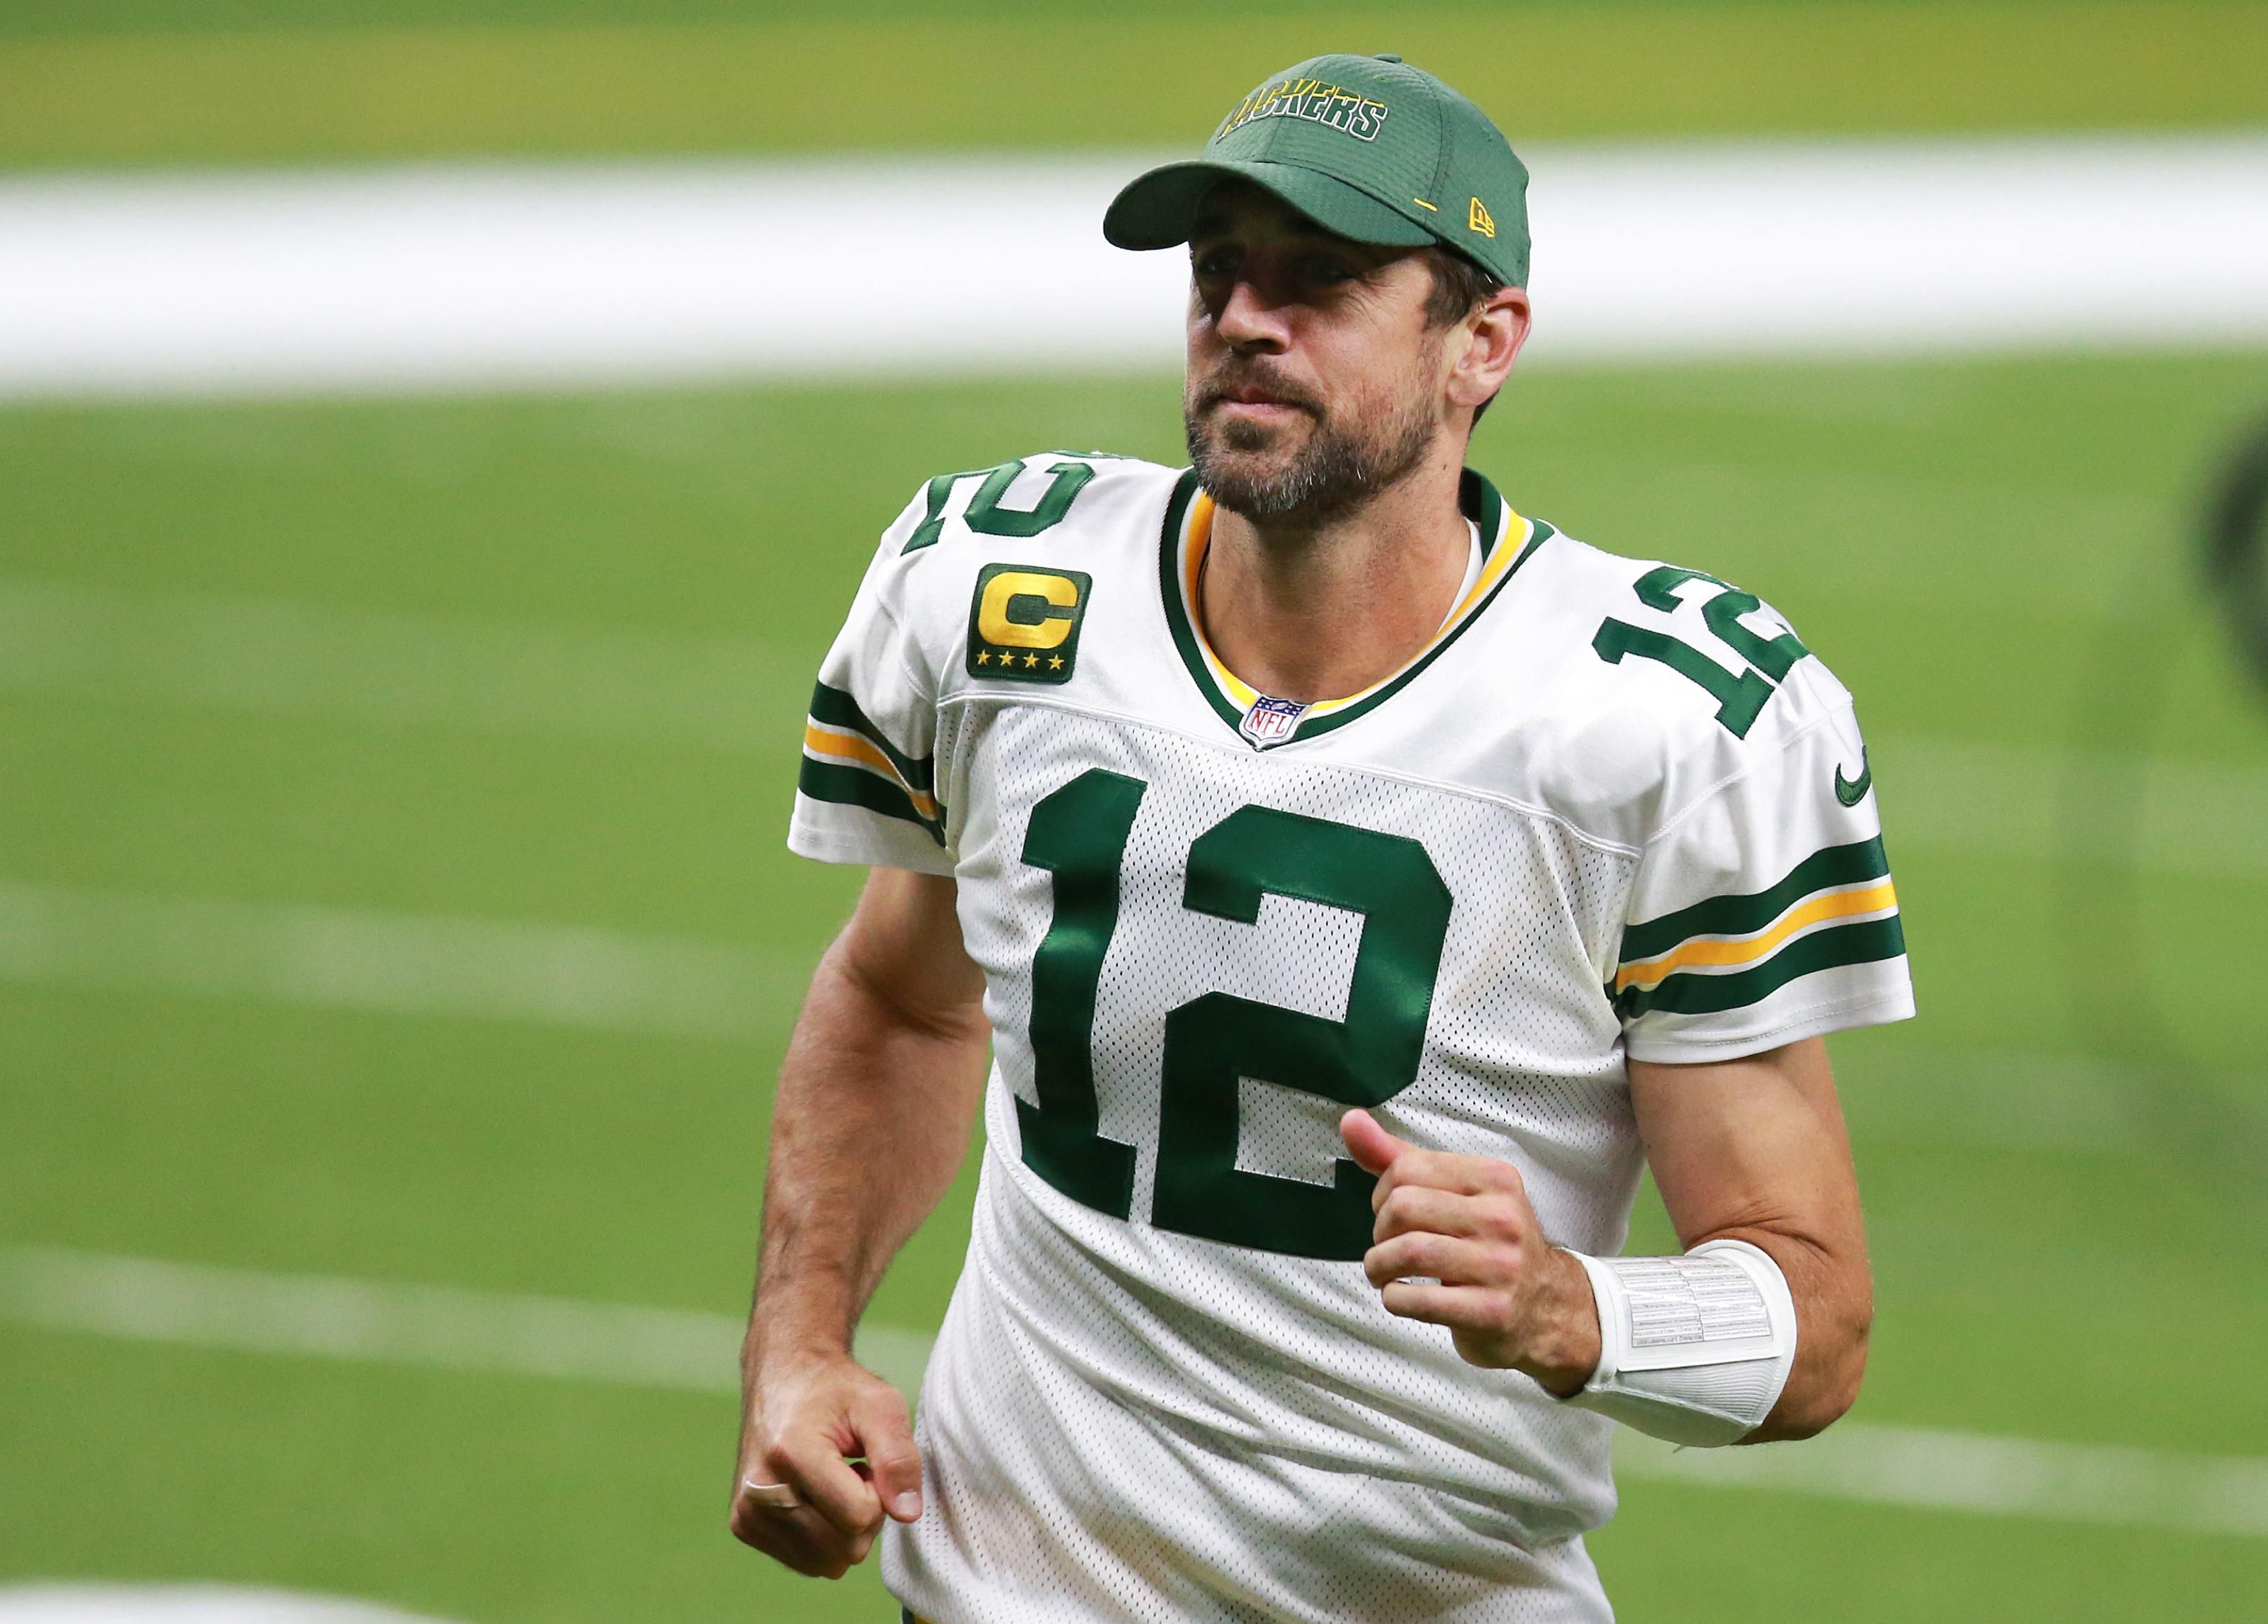 Aaron Rodgers of the Green Bay Packers